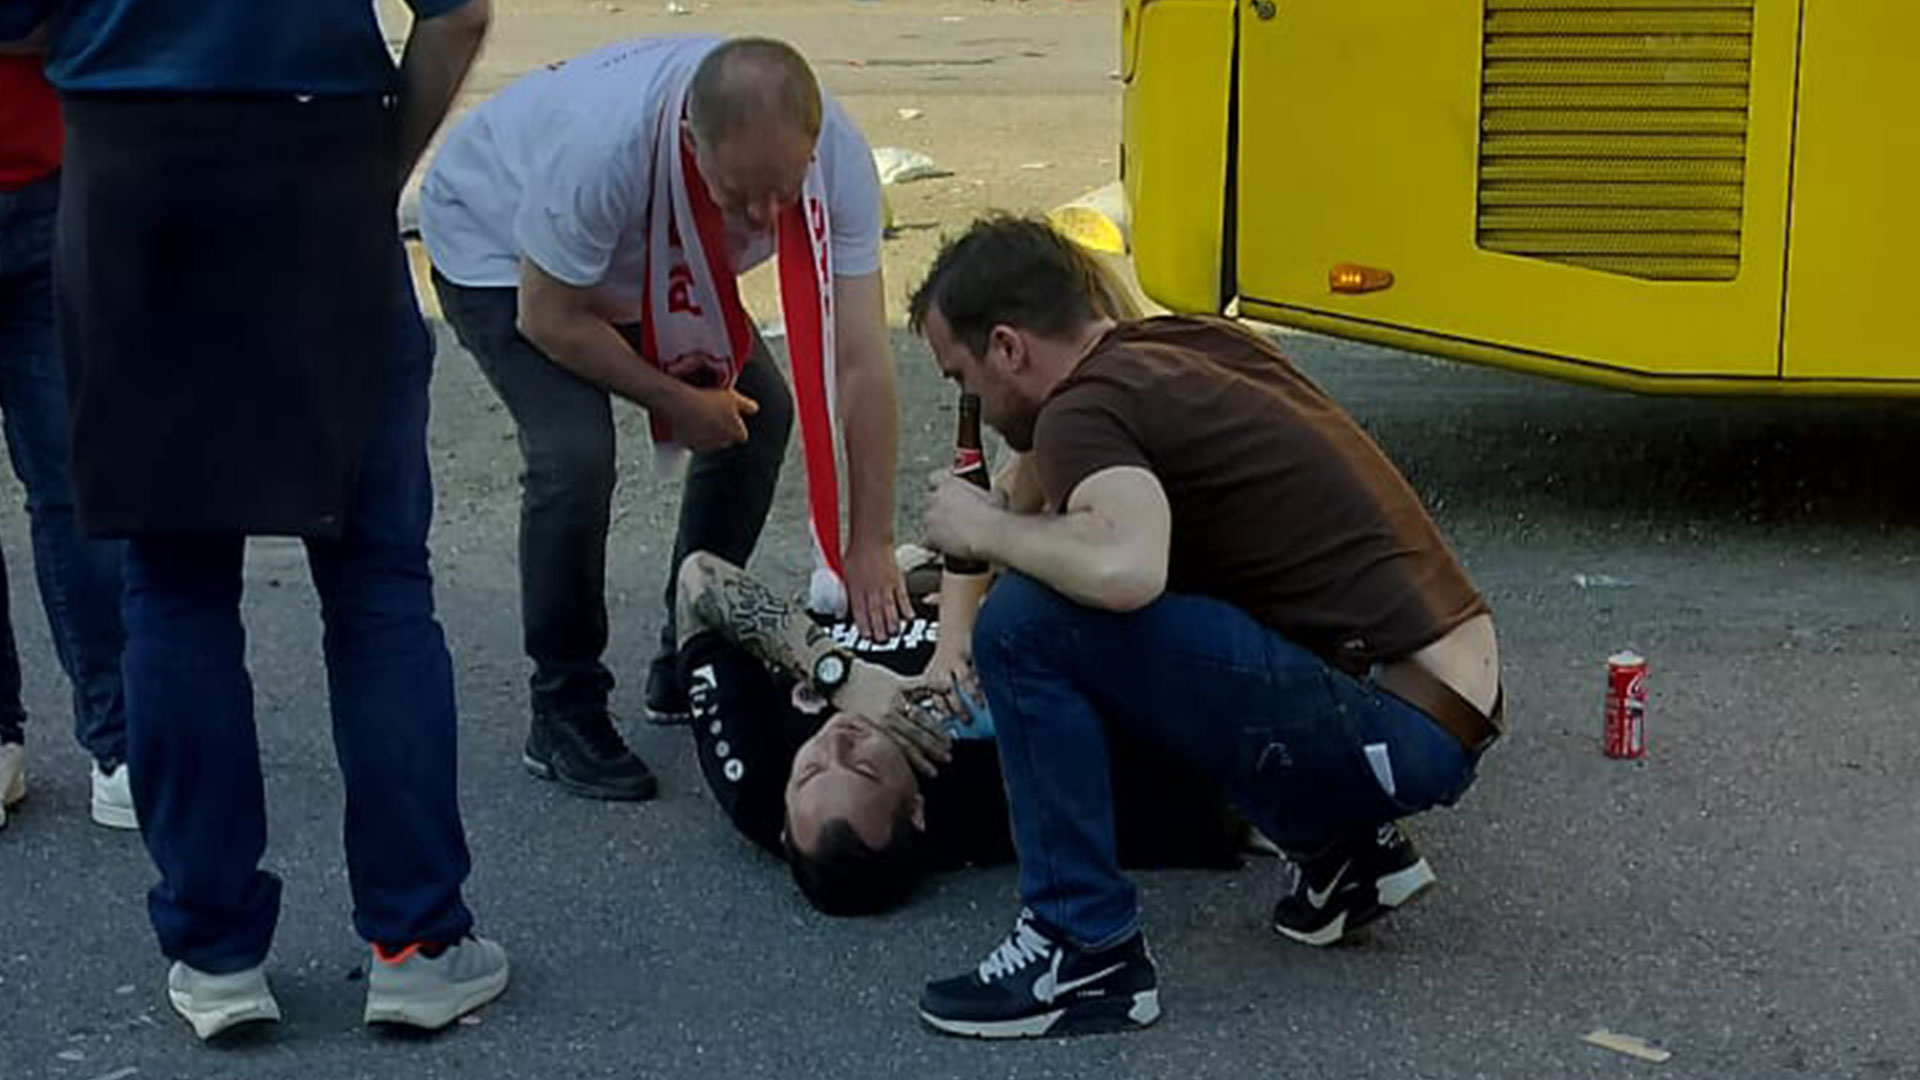 Darts star Kim Huybrechts BREAKS SHOULDER after being brutally attacked by football hooligans at Belgian cup final [Video]